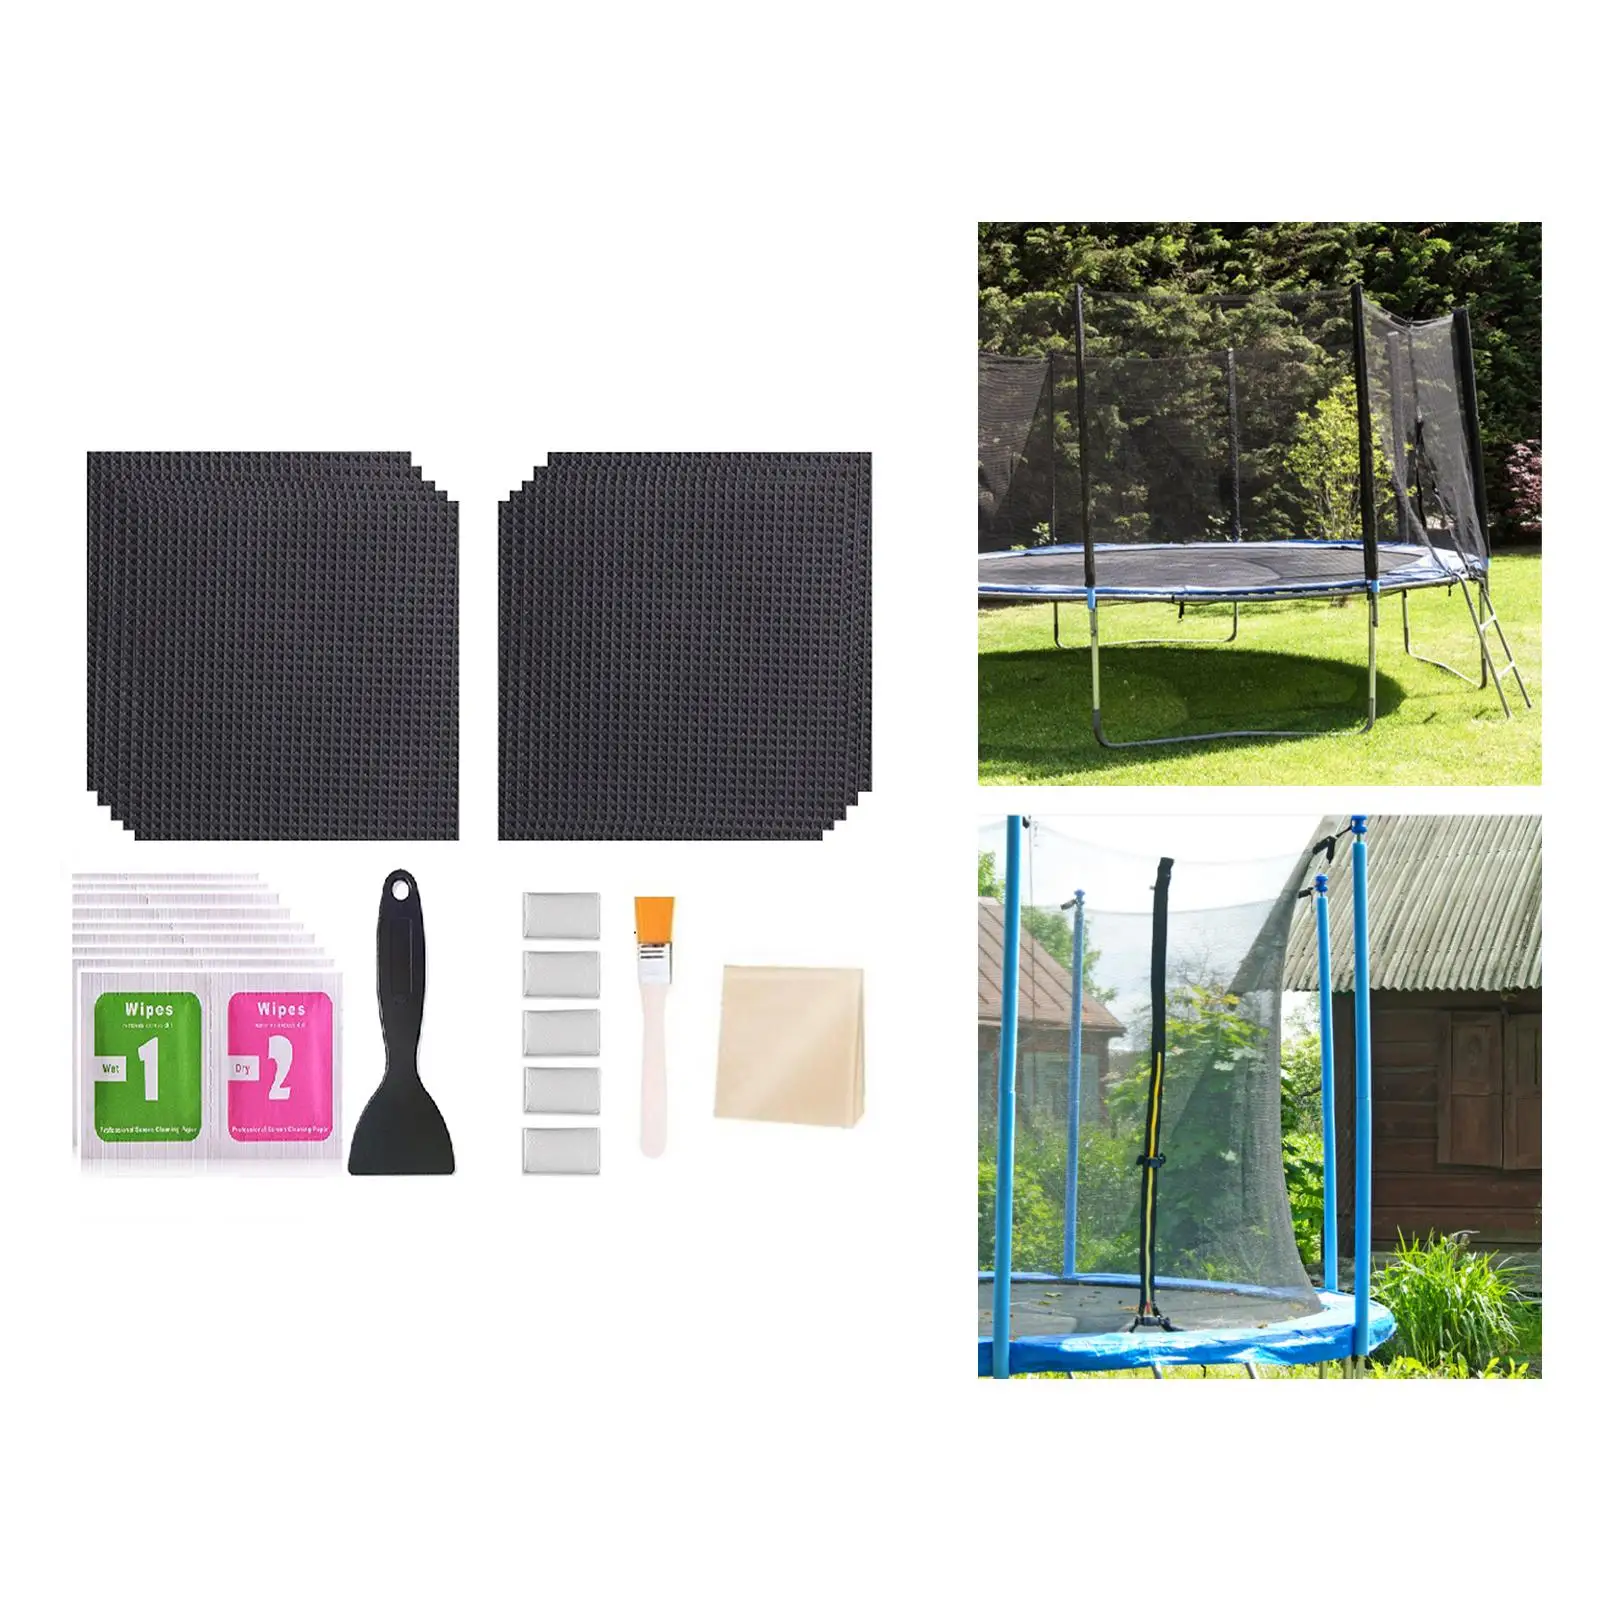 Strong Trampoline Repair Patches Tool Kit Tent Hole Cover for Tent Trampoline Trampoline Patch